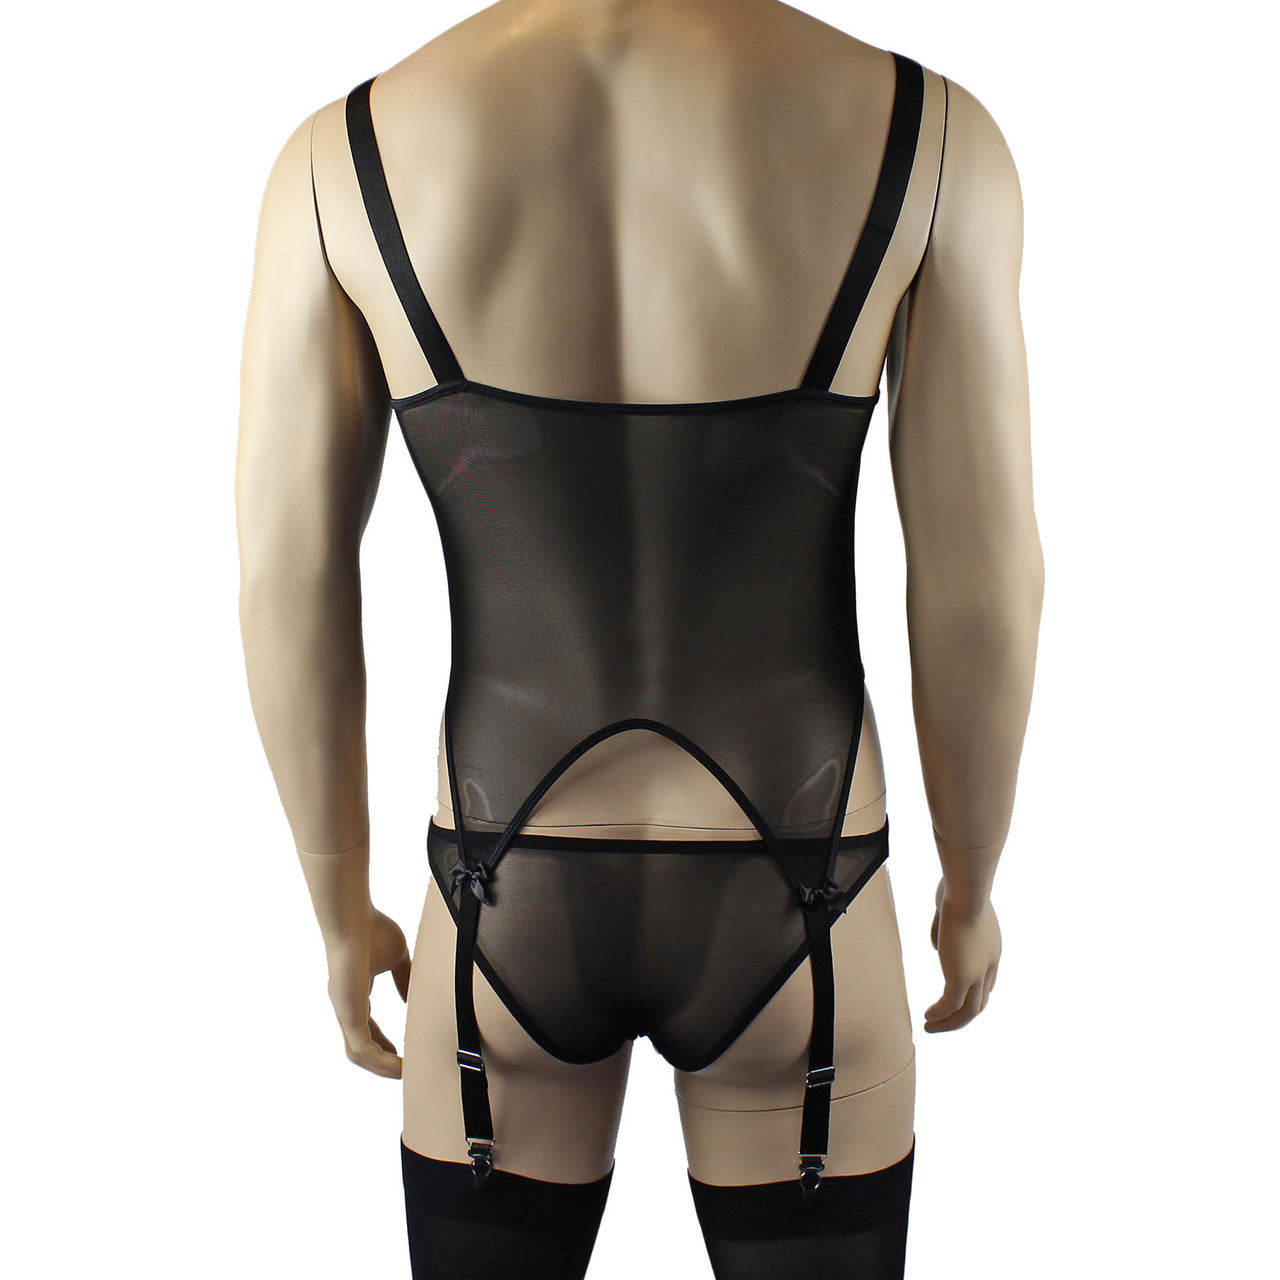 Mens Exotic Corset Top, Brief & Stockings - Sizes up to 3XL Black